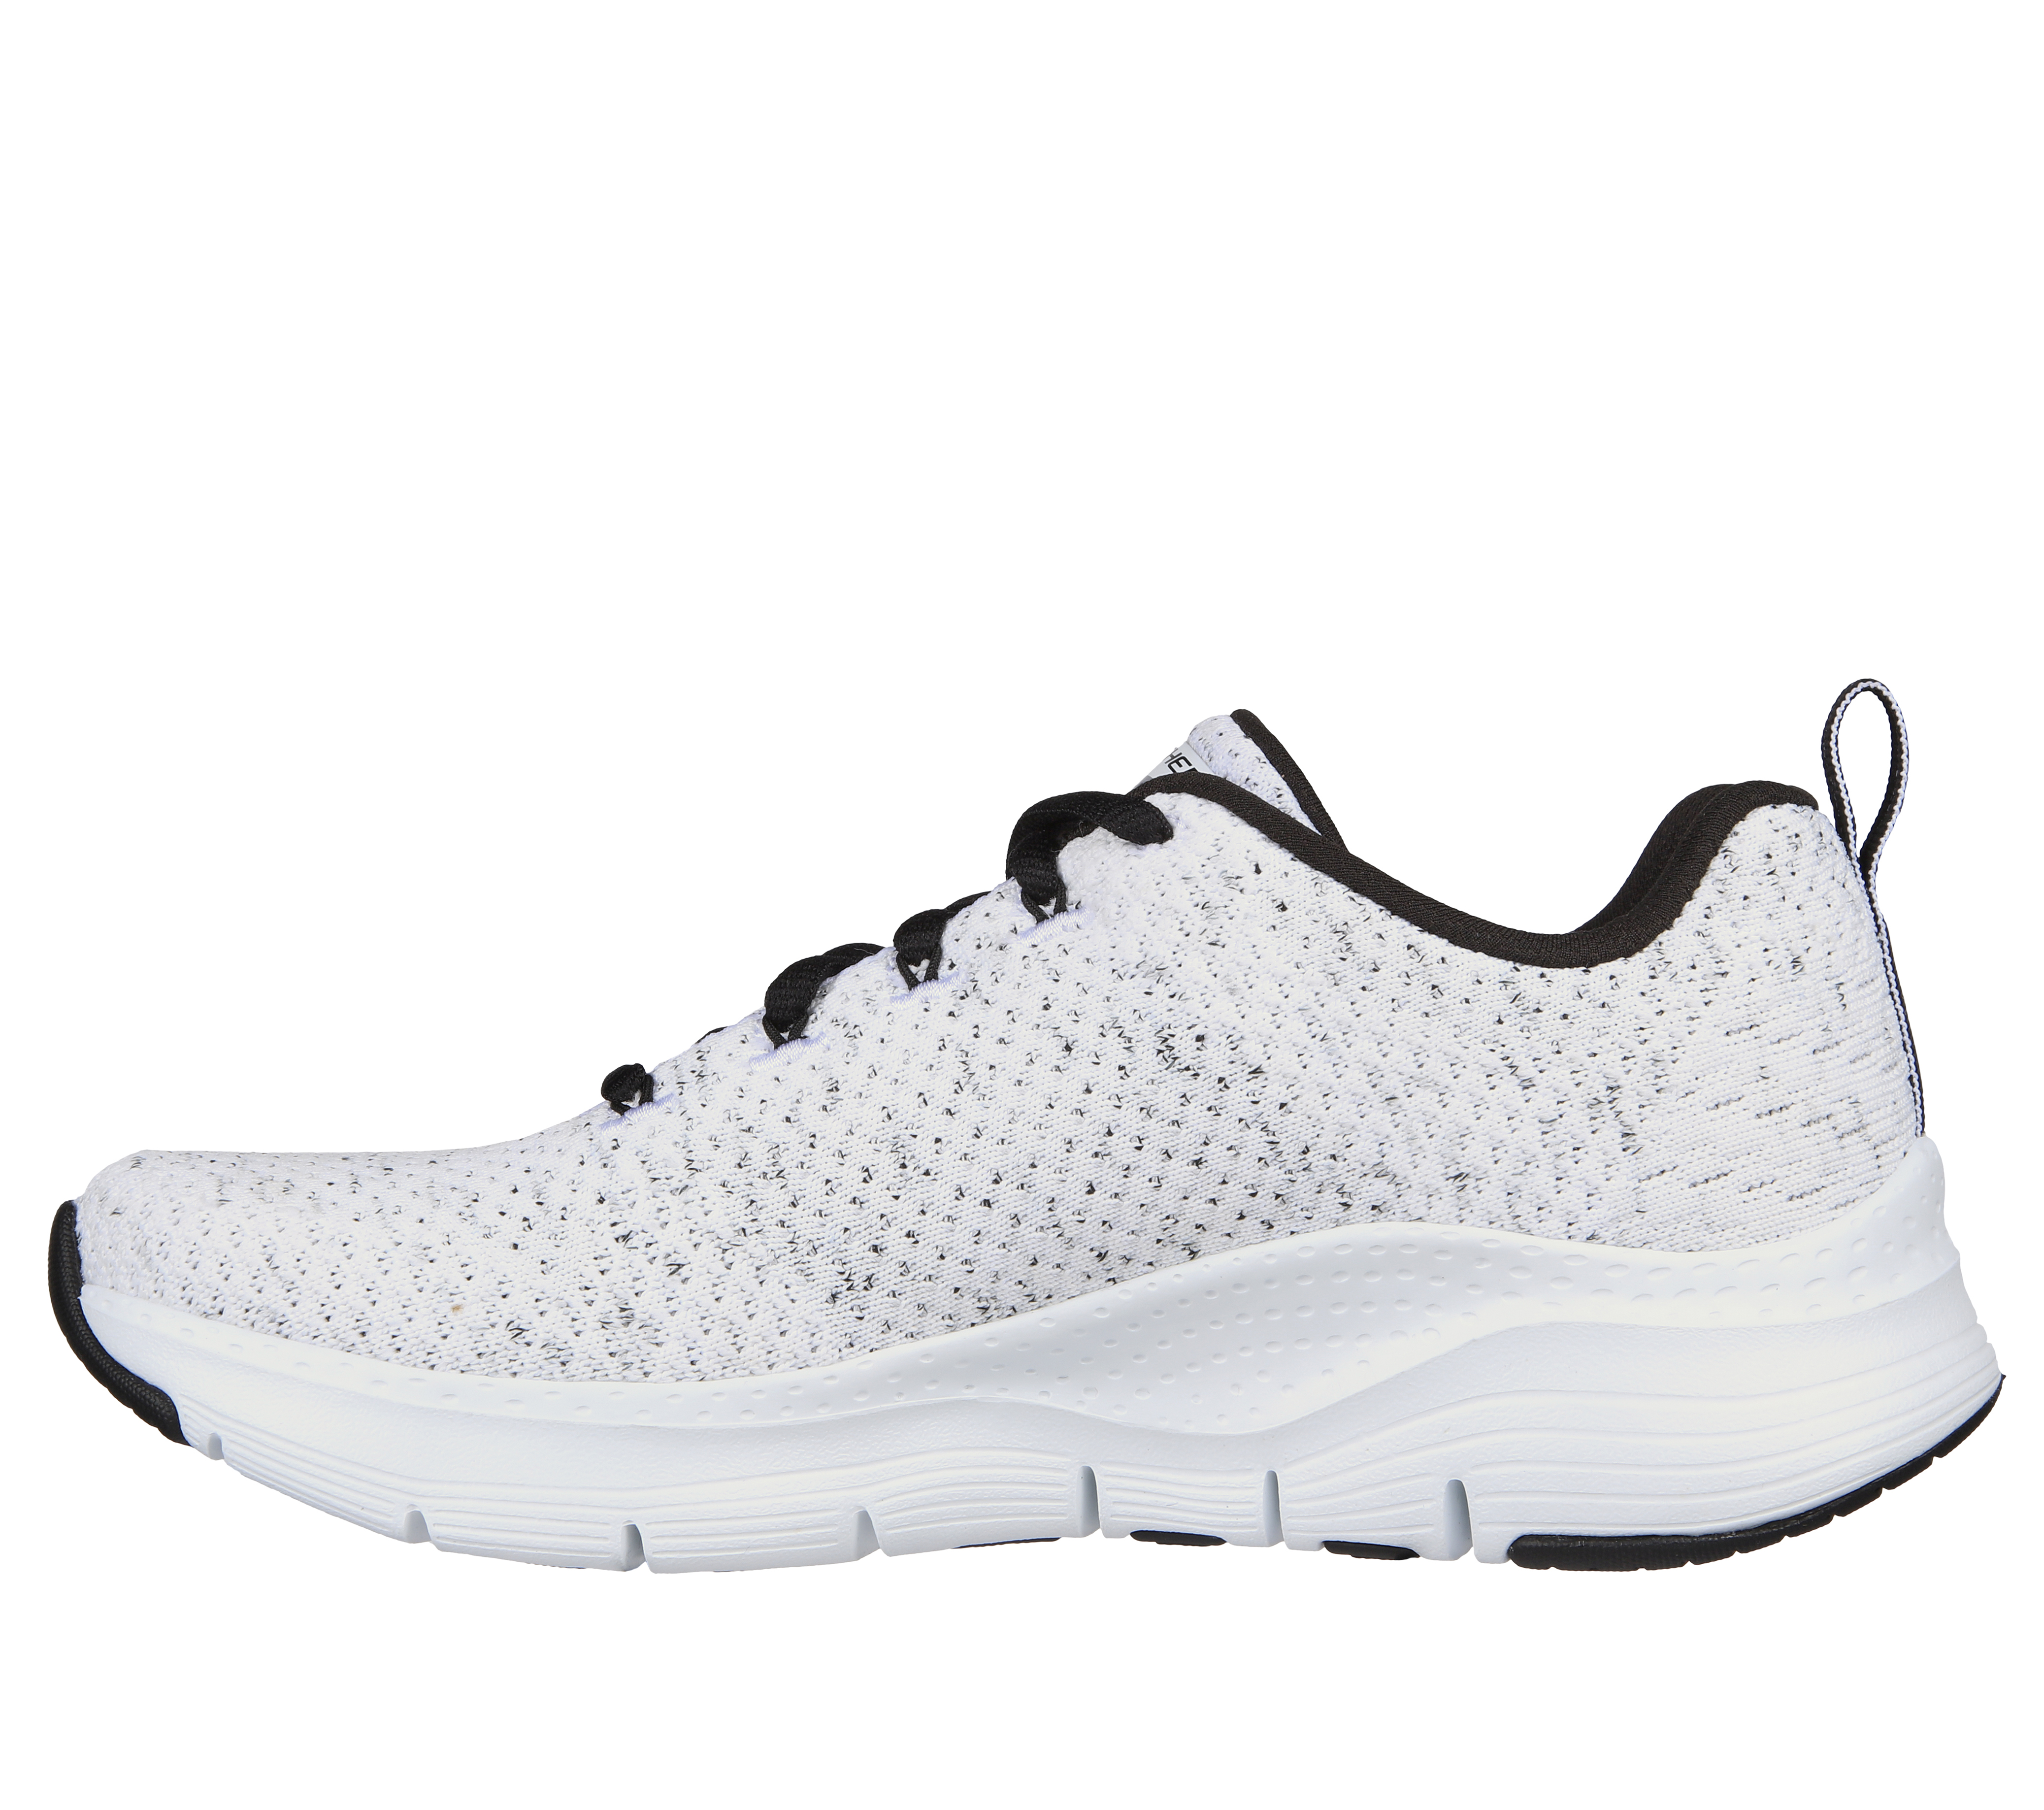 Skechers Arch Fit Glee For All - Preto - Ouremsport